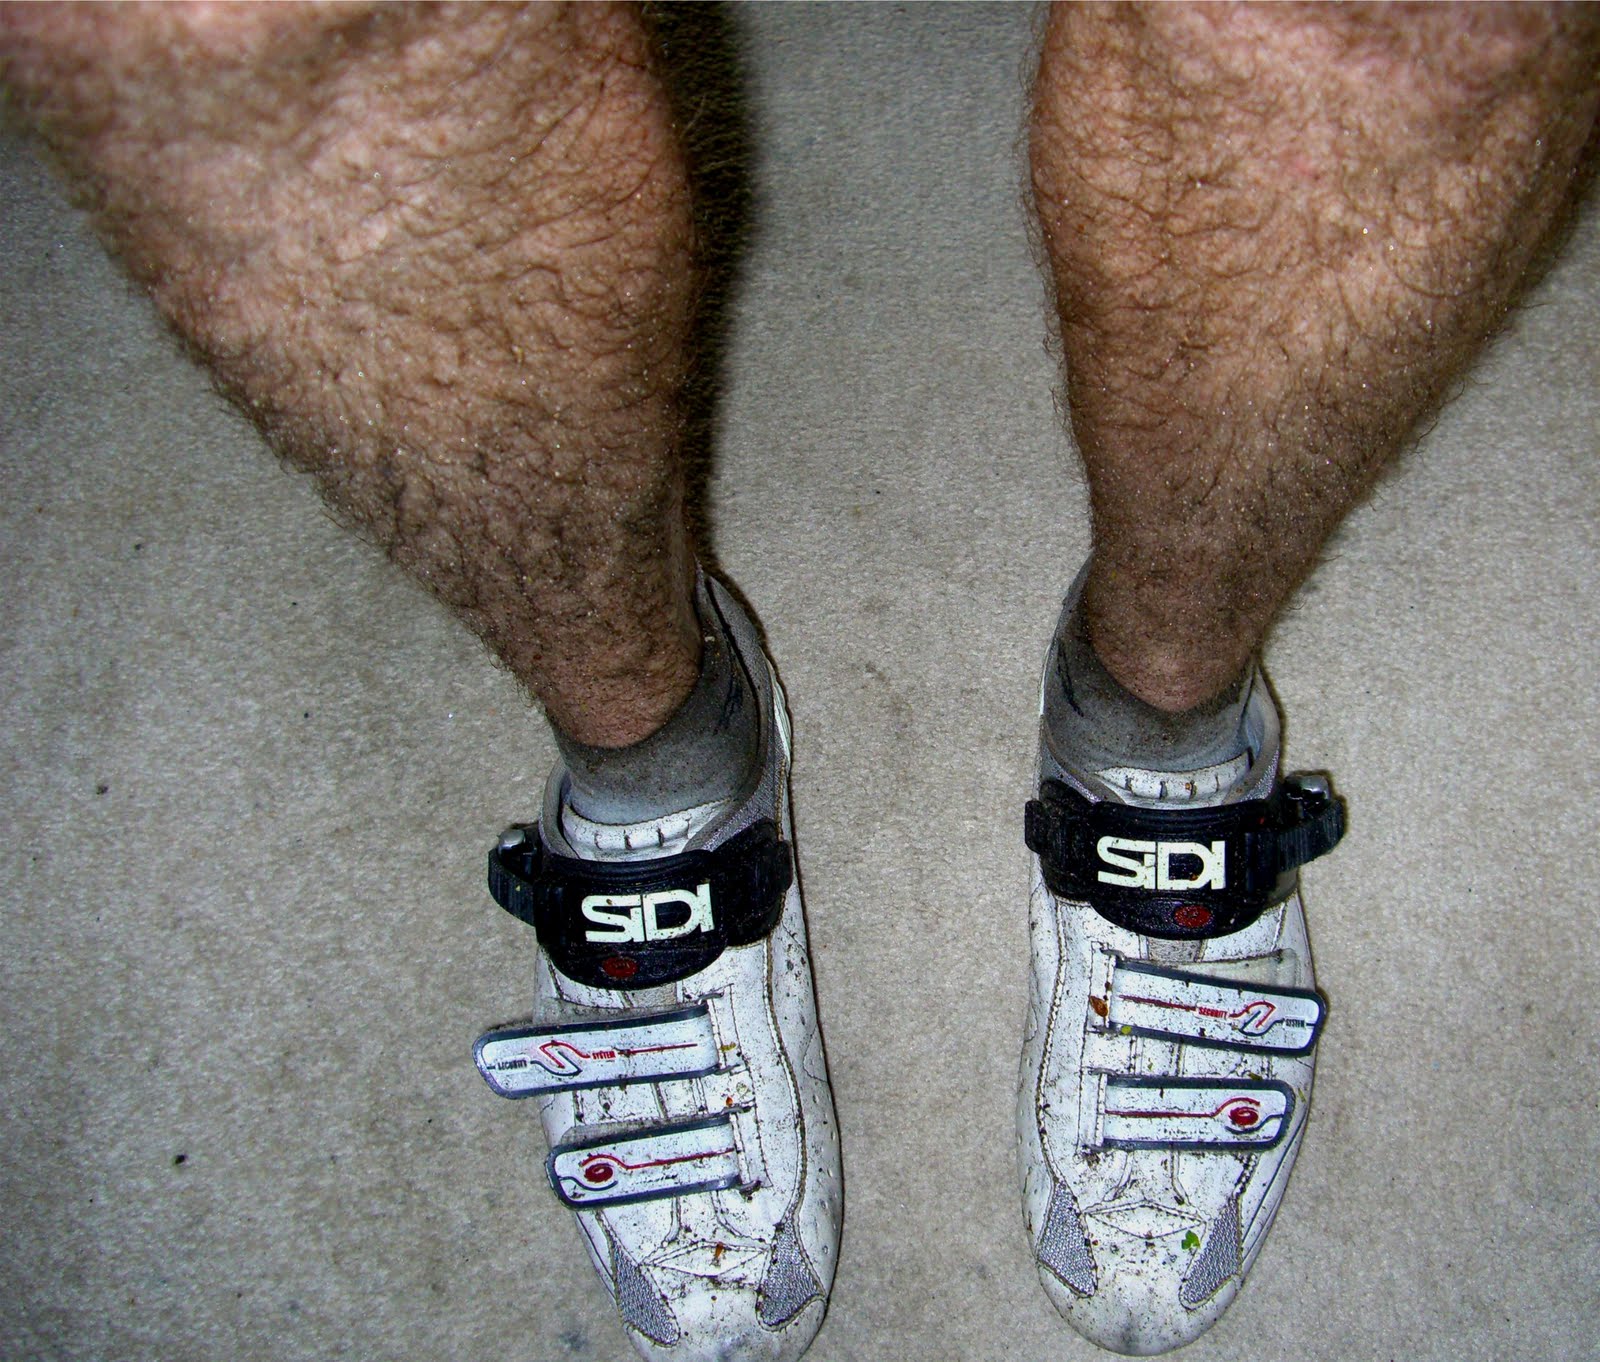 To Shave Or Not To Shave Thepracticaltriathlete pertaining to Cycling Benefits Of Shaving Legs